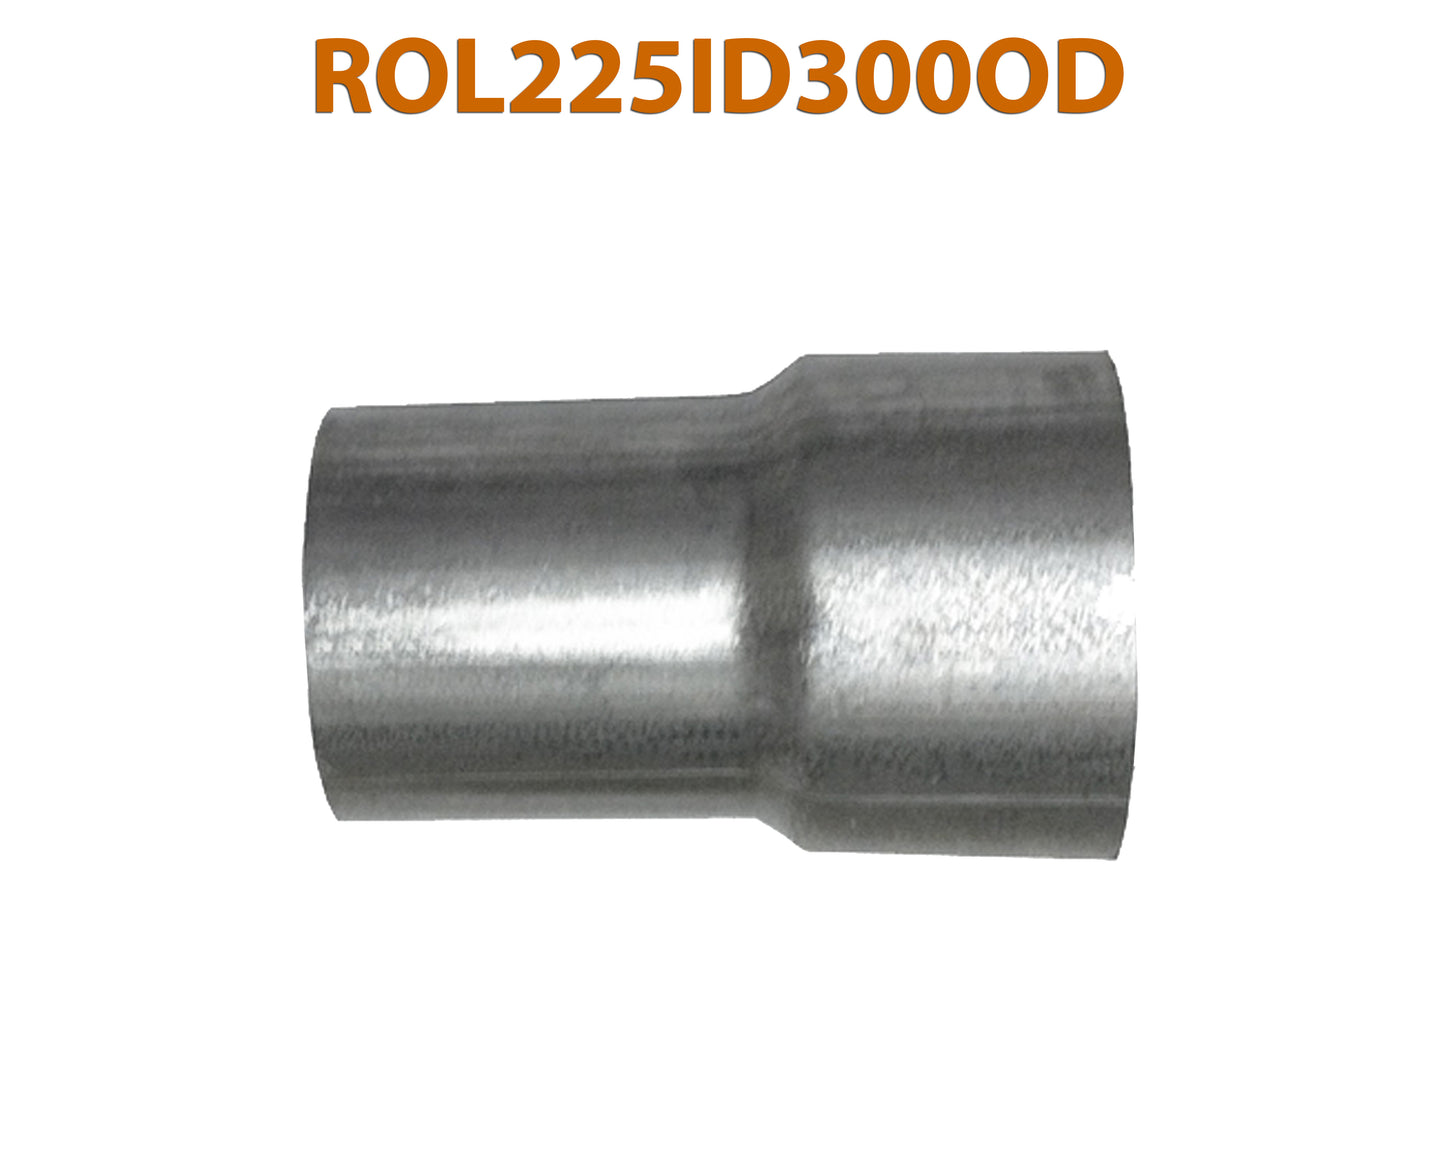 ROL225ID300OD 617573 2 1/4" ID to 3" OD Universal Exhaust Pipe to Component Adapter Reducer